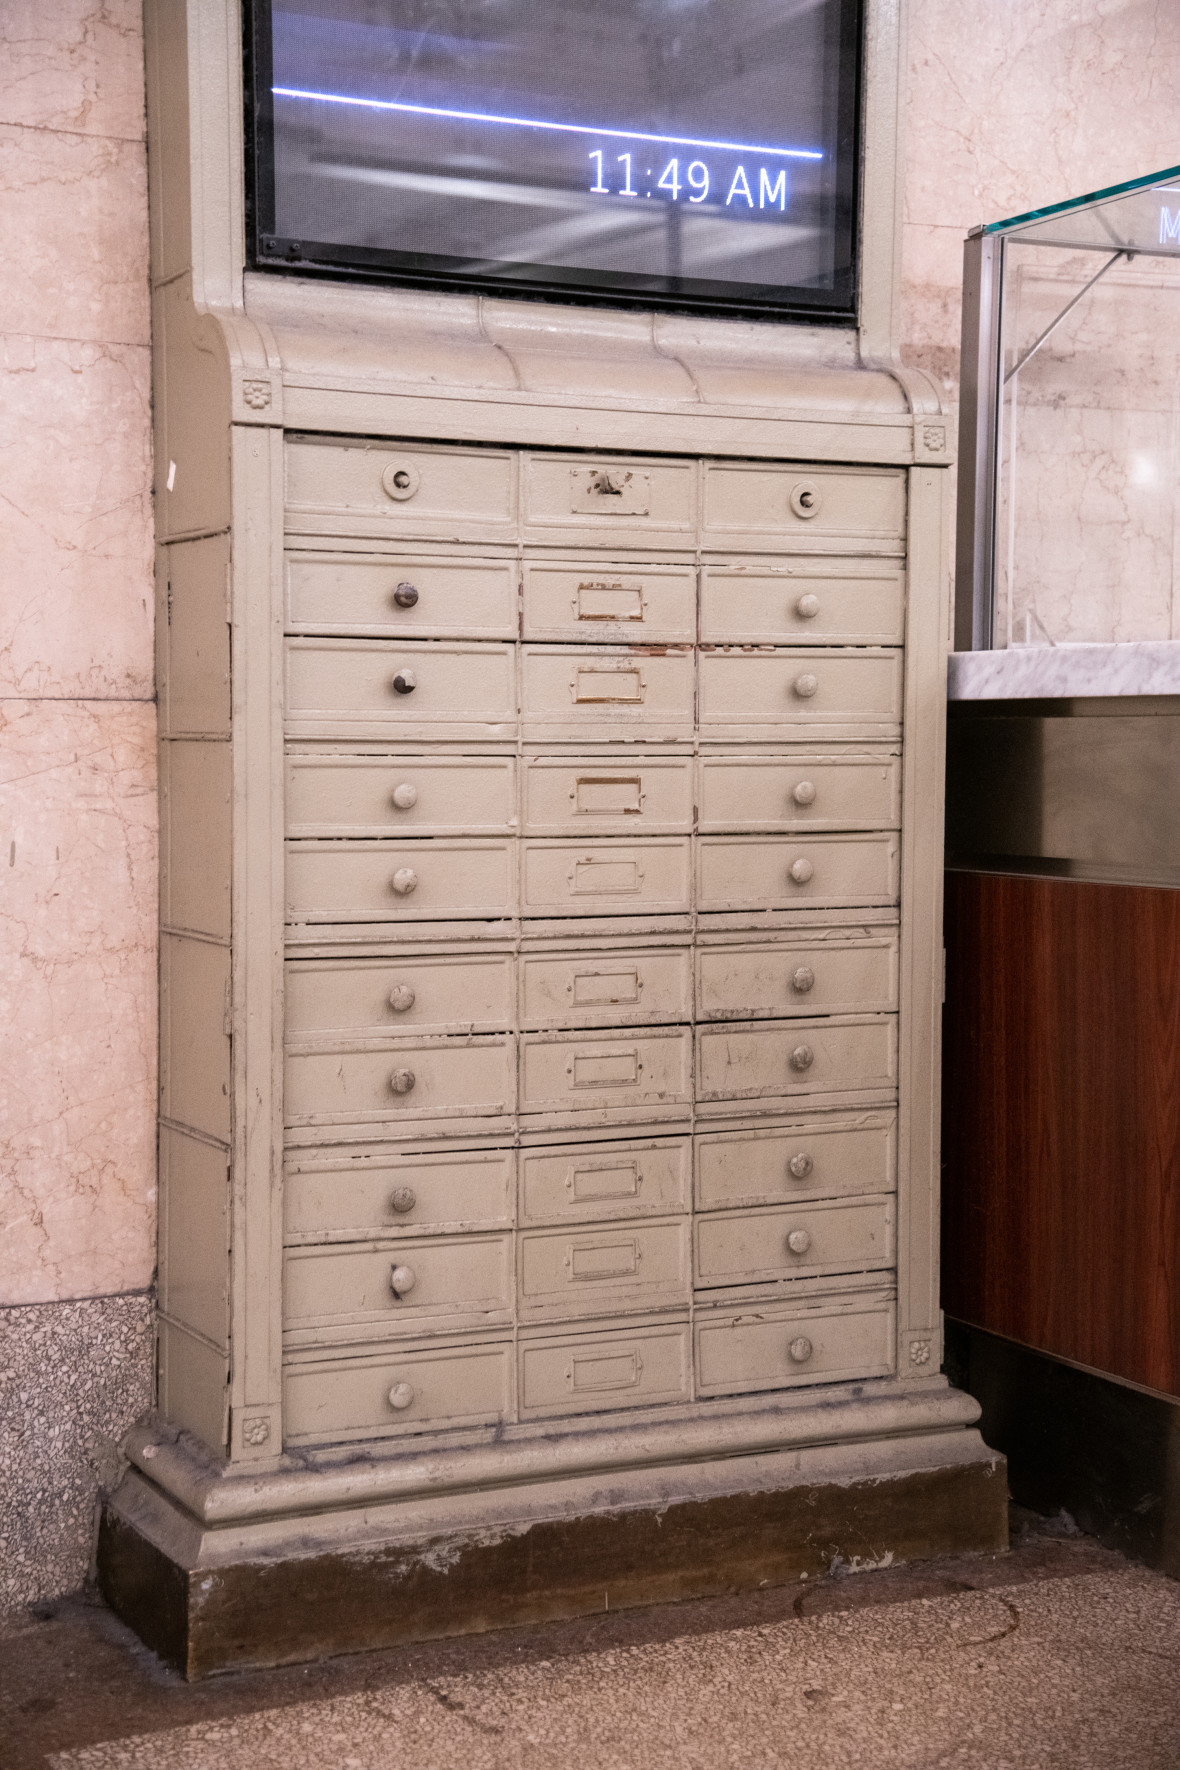 The old drawers